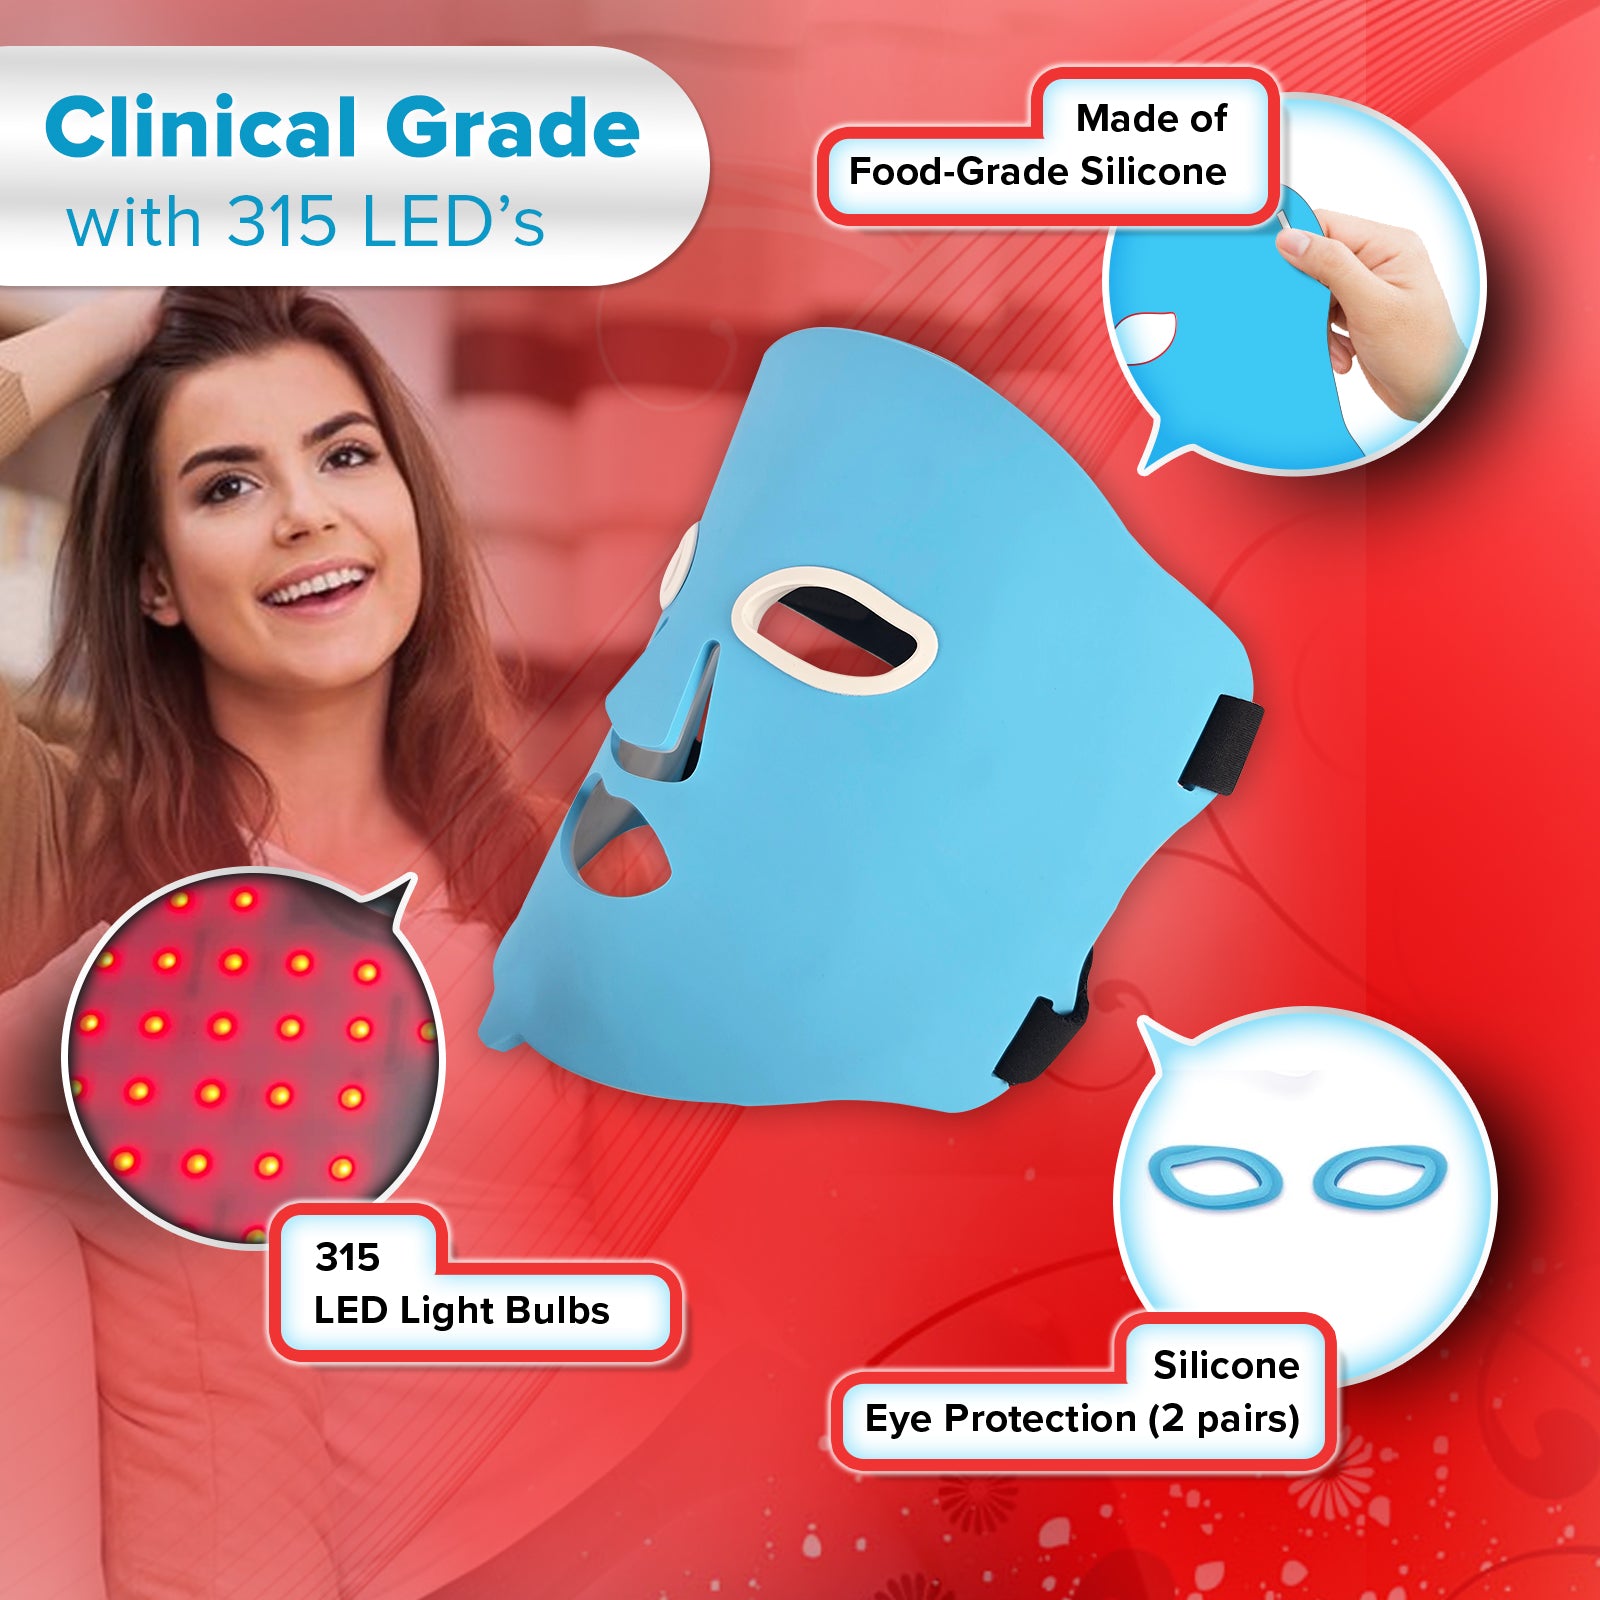 Multi-Spectrum Red Light Therapy for Face, 7 spectrums-Red, Blue, Cyan, Yellow, Purple, Green, Violet, 660nm & 850nm Wavelength, 100% Silicone, 324 Total LED'S, Portable Rechargeable Battery